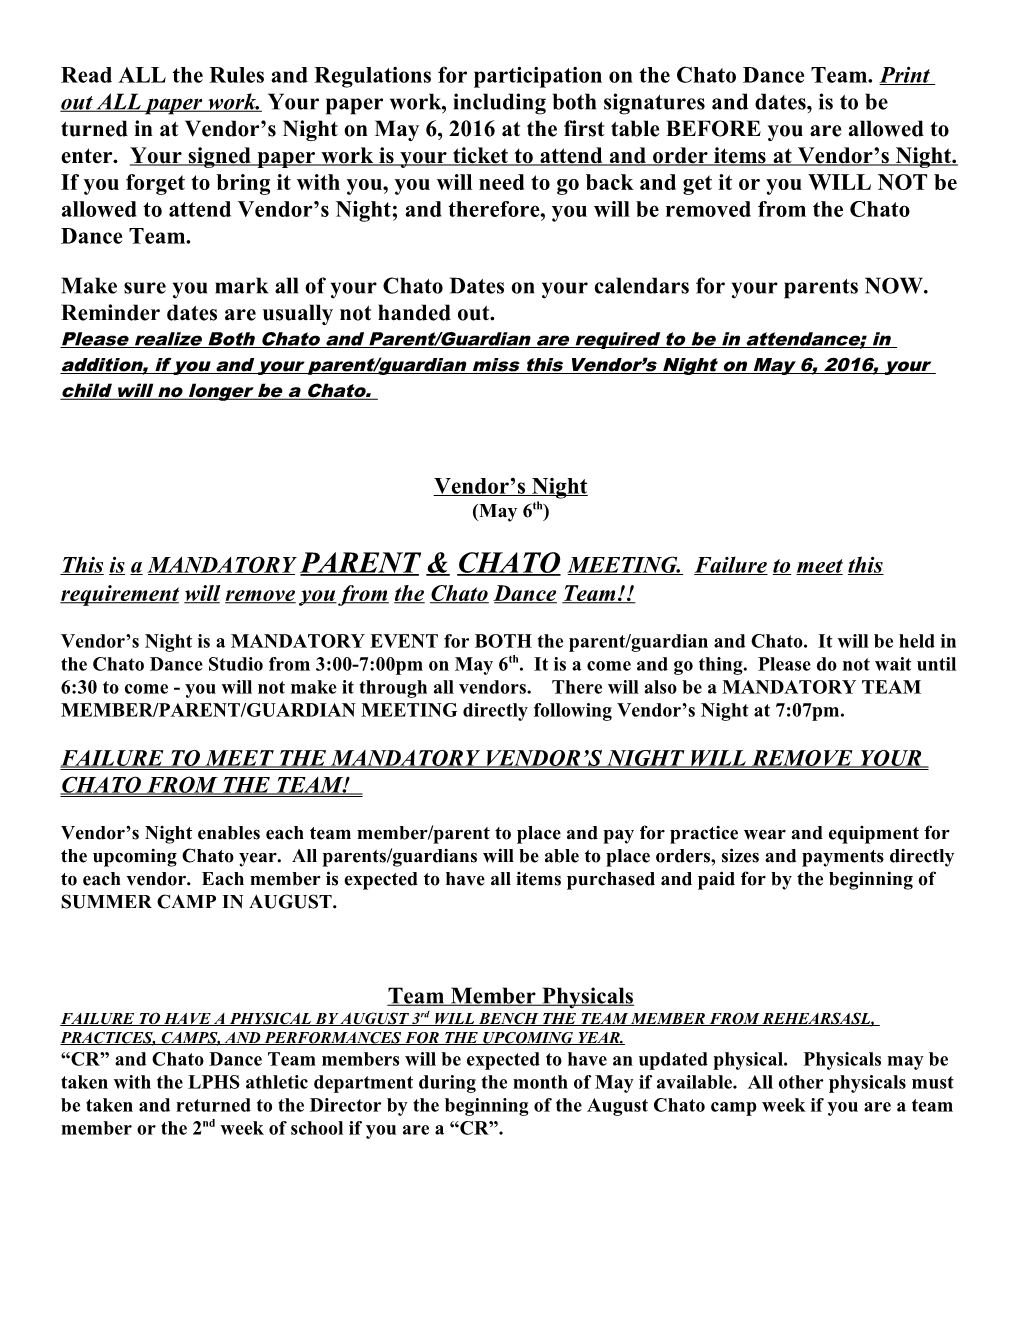 Read ALL the Rules and Regulations for Participation on the Chato Dance Team. Print Out